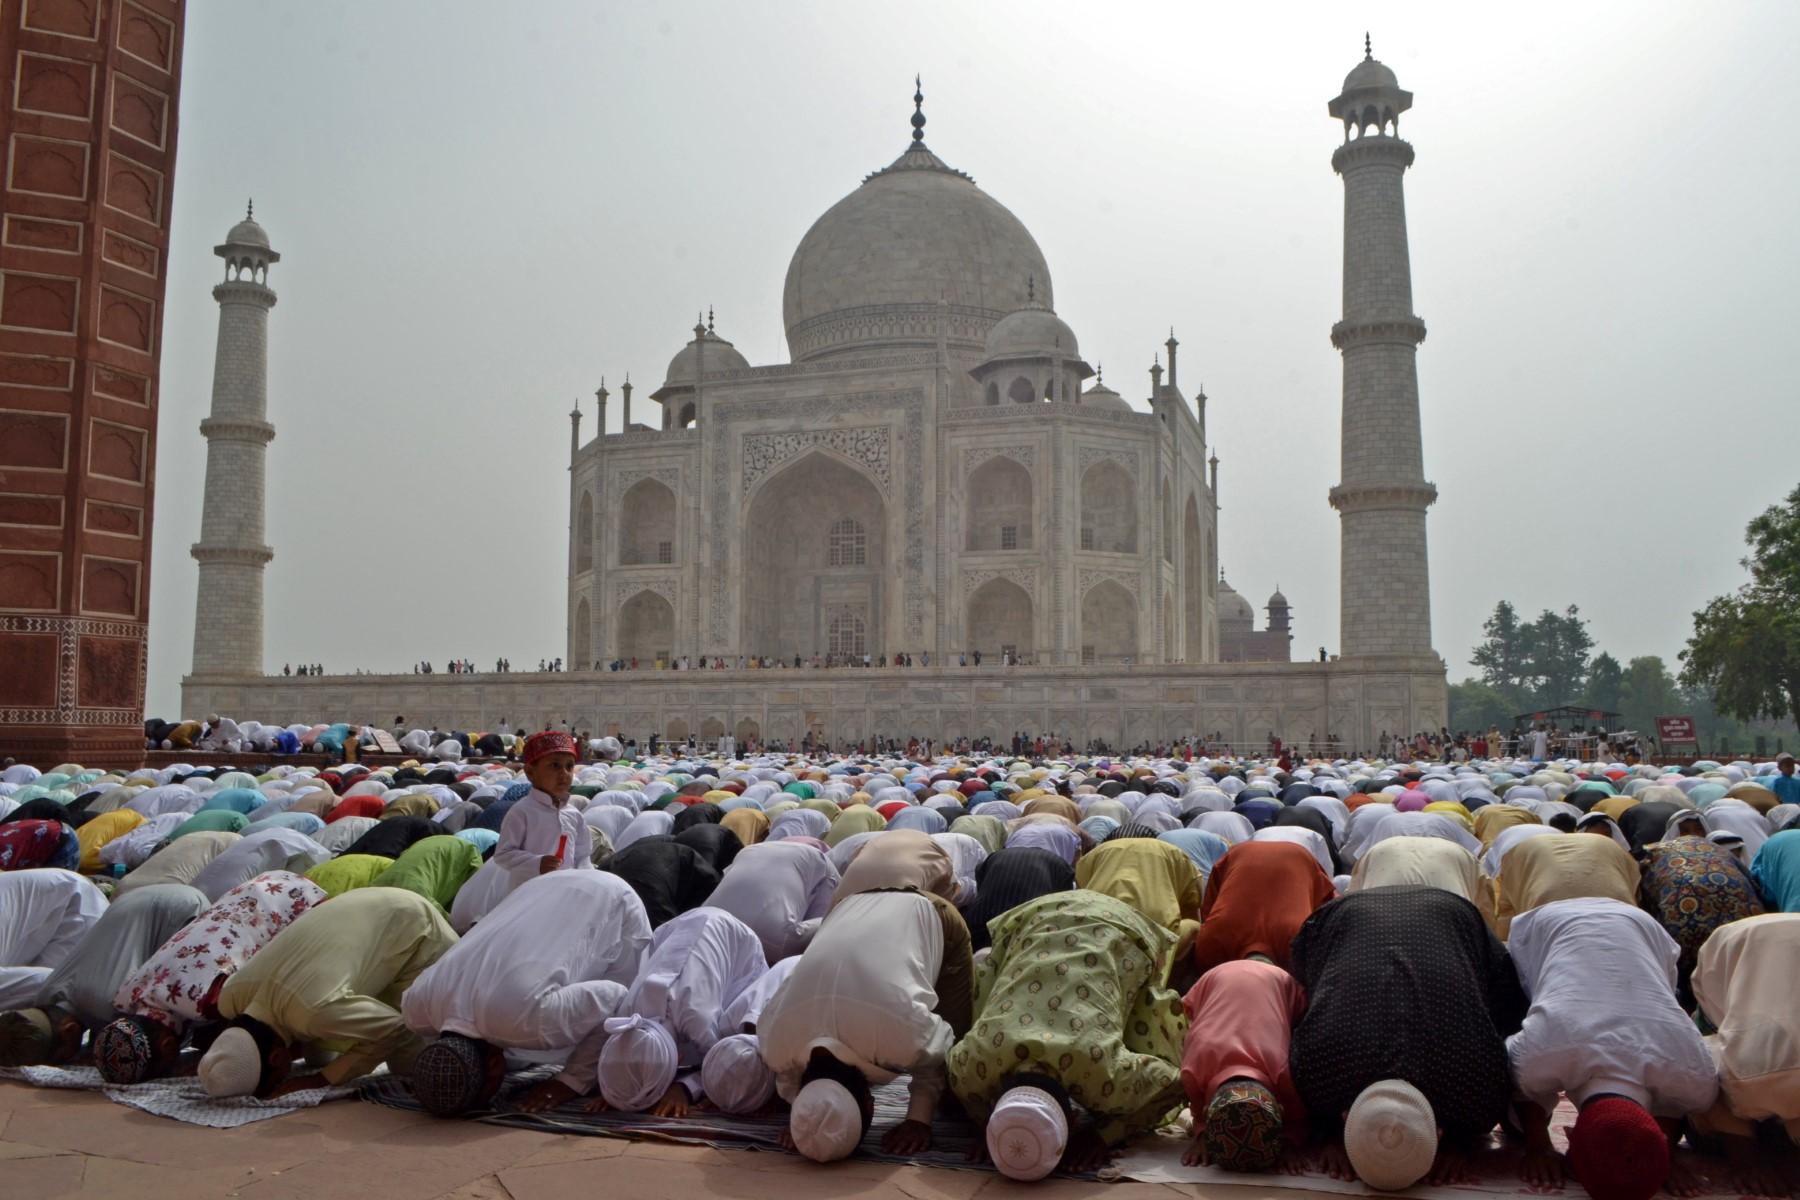 Muslim devotees offer a special morning prayer to start the Eid festival, which marks the end of their holy fasting month of Ramadan, inside the complex of Taj Mahal in Agra on May 3. Photo: AFP